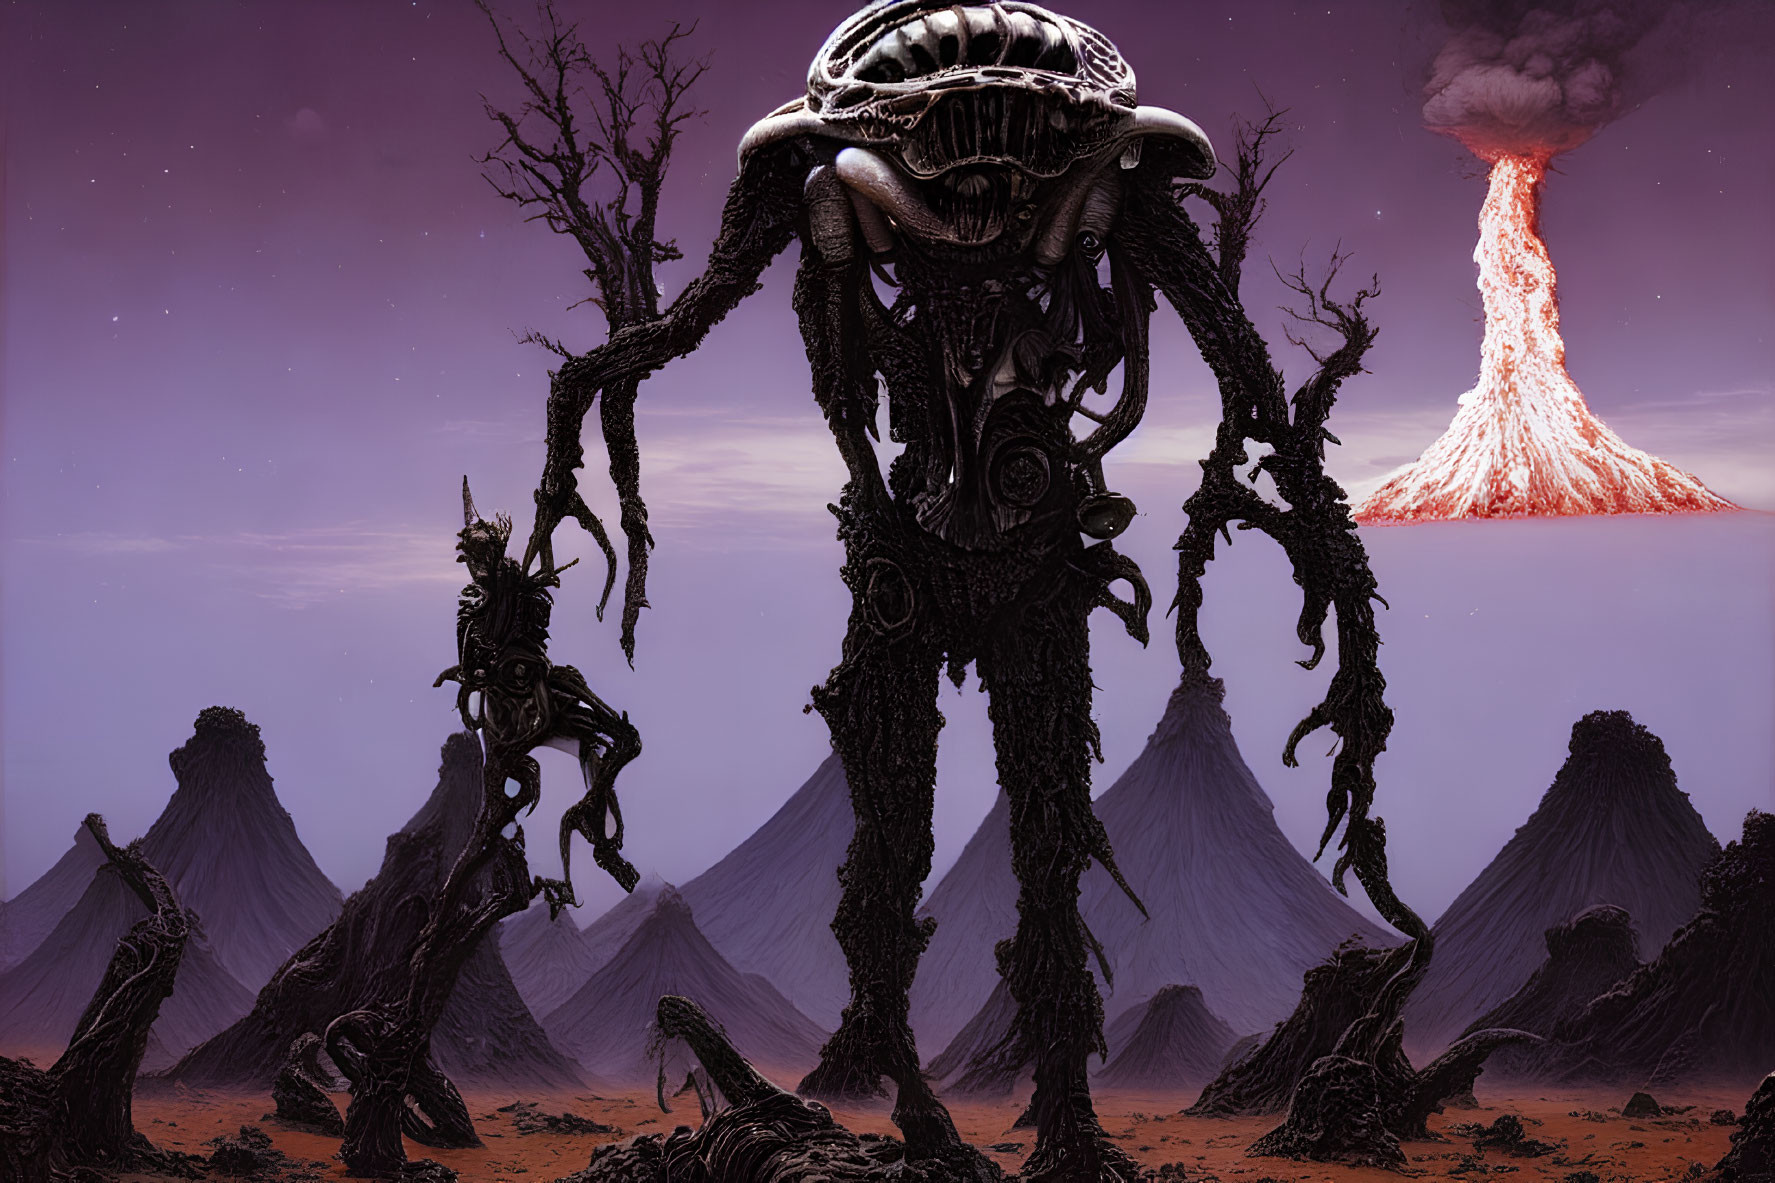 Surreal landscape with biomechanical entity, figures, twisted trees, purple sky, volcano